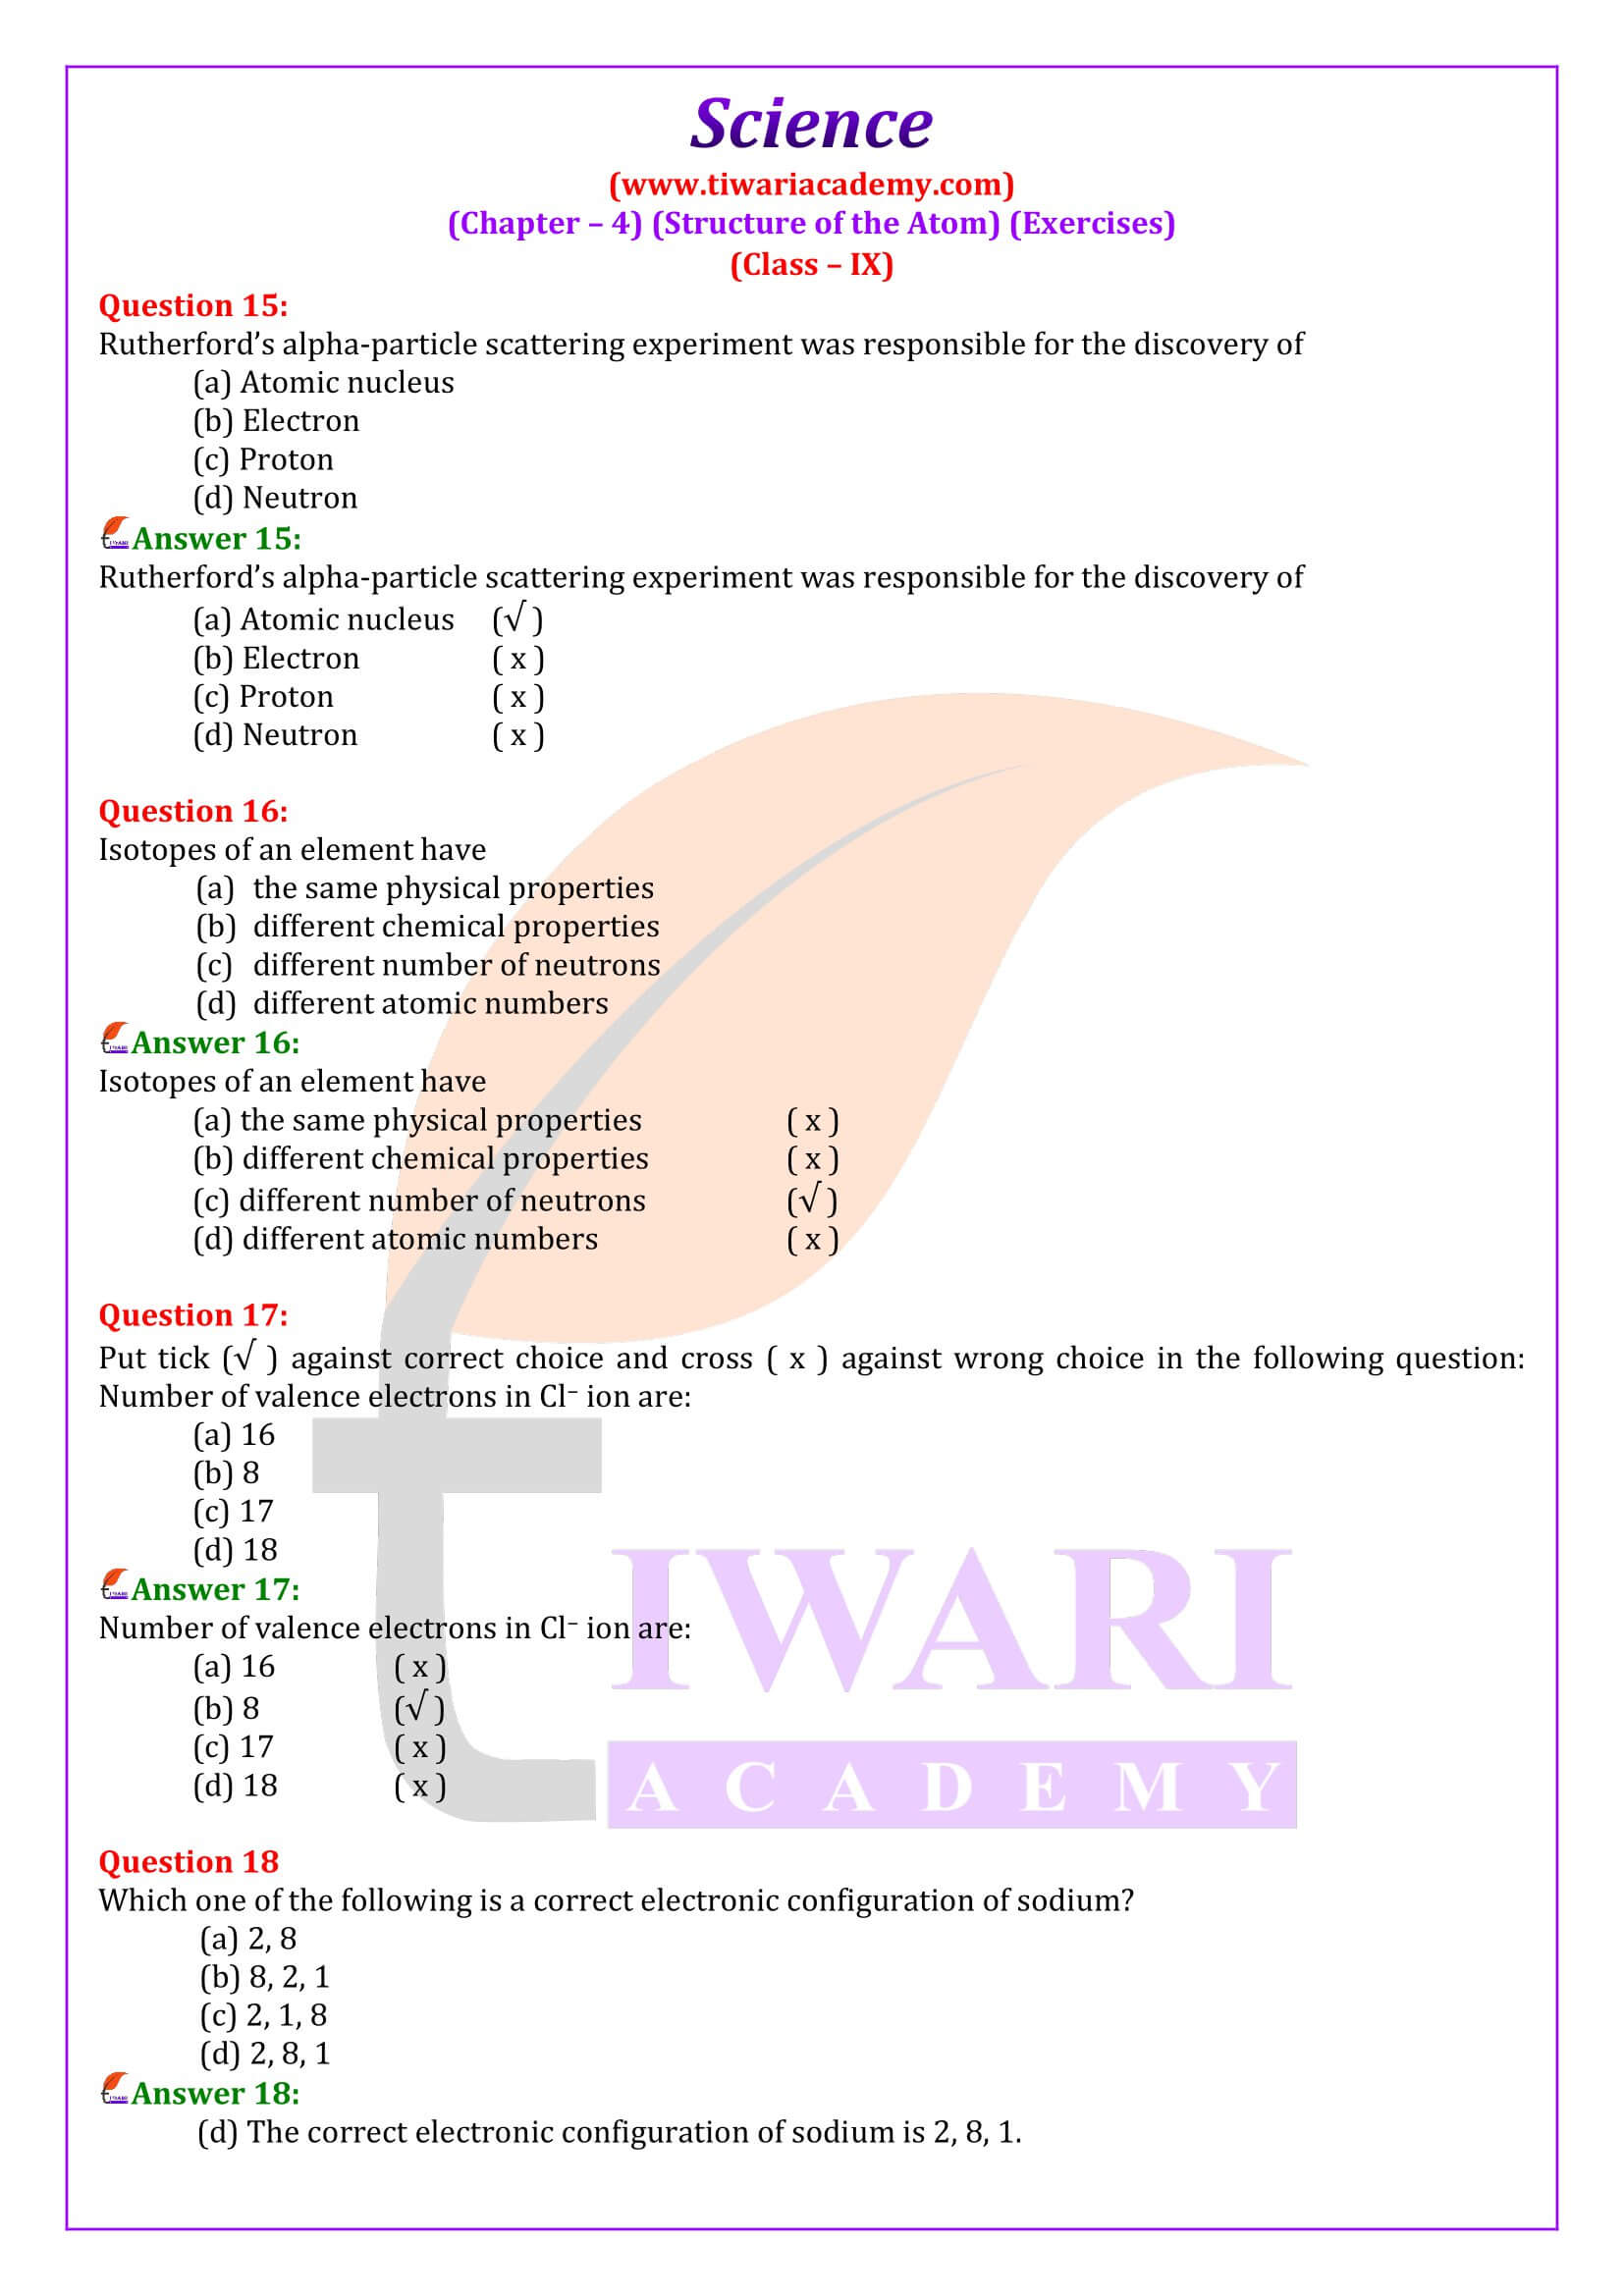 NCERT Solutions for Class 9 Science Chapter 4 Exercise answers